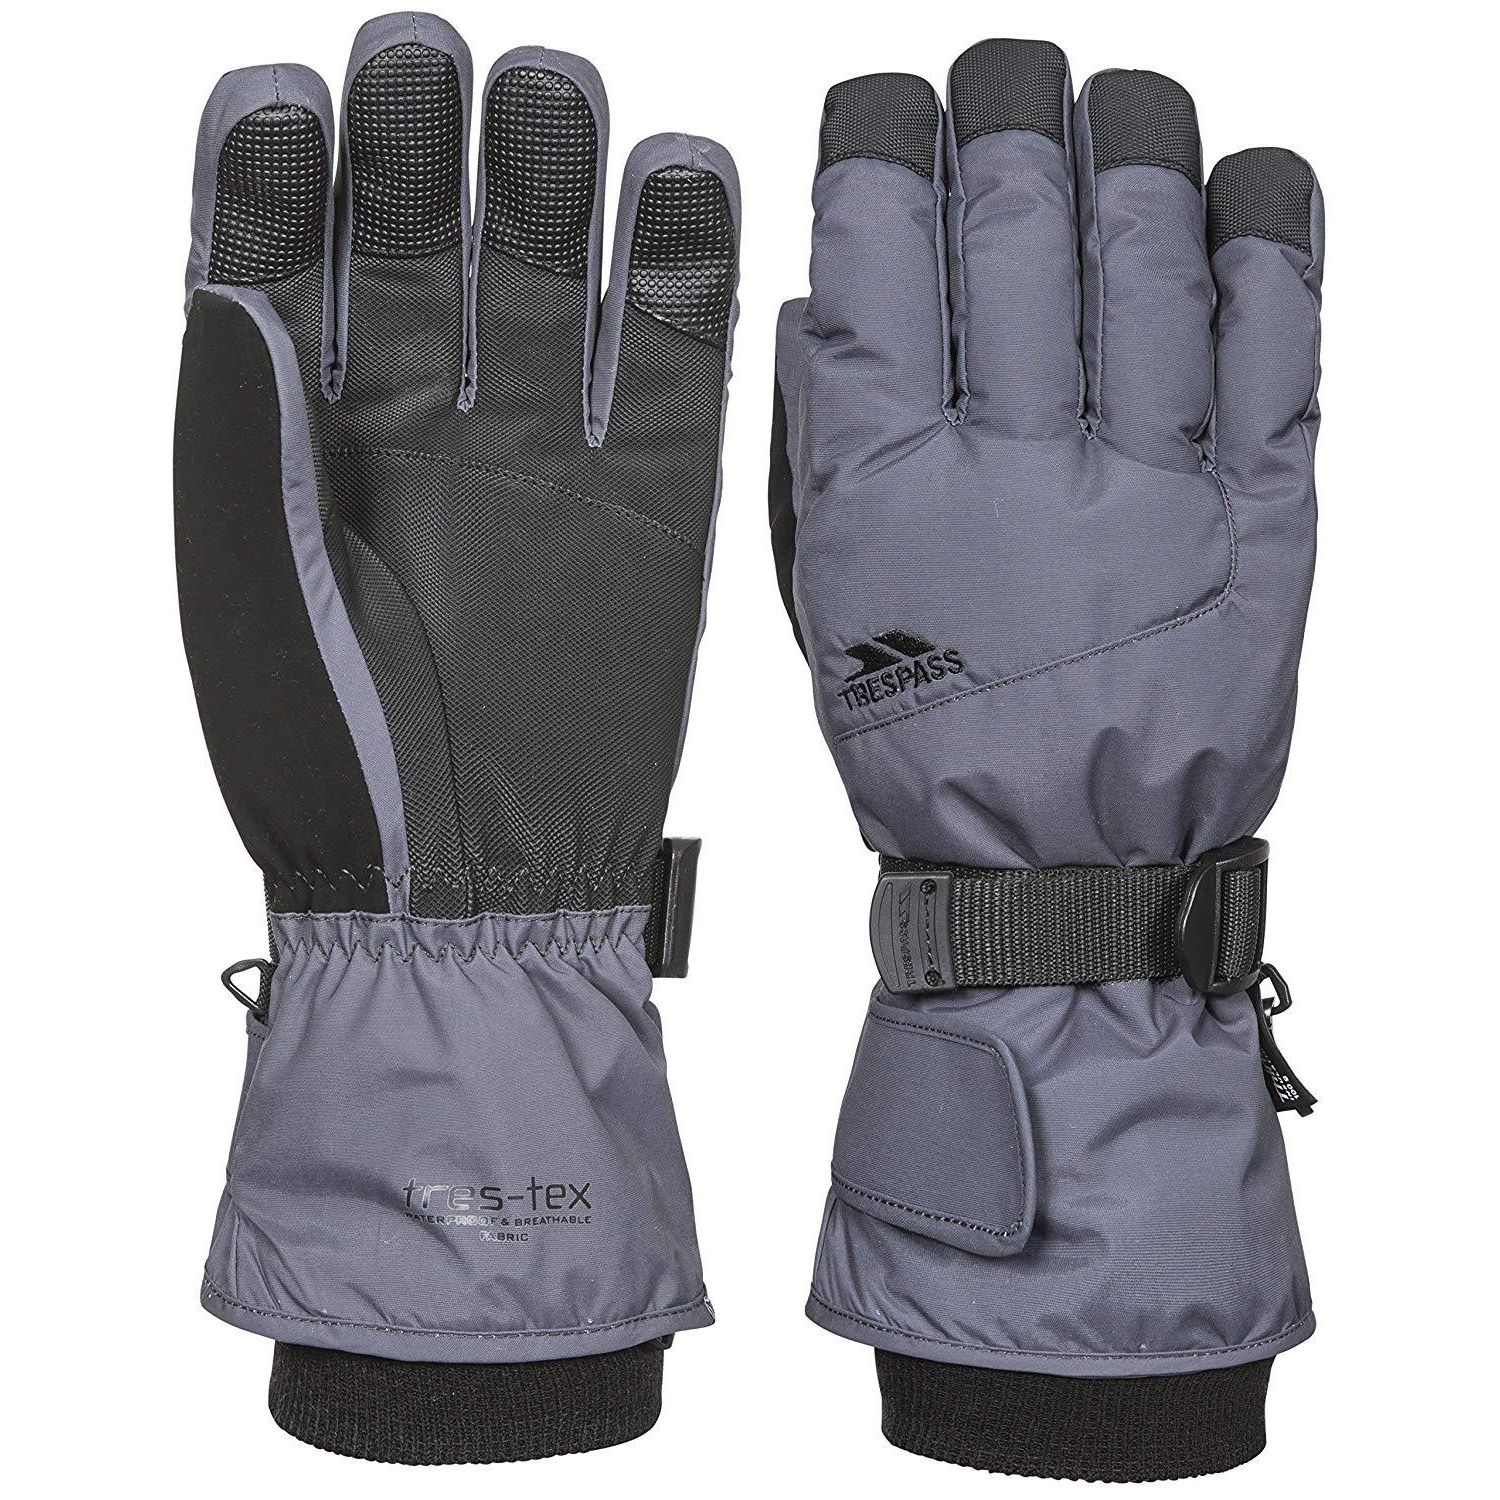 Unisex glove. Lightly padded. Adjustable wrist strap. Adjustable cuff tab. Glove retainer. Inner knitted cuff. Nose wipe. Waterproof, breathable. Shell: 100% Polyamide, Palm: 100% Polyurethane, Lining: 100% Polyester, Insulation: 3M Thinsulate.